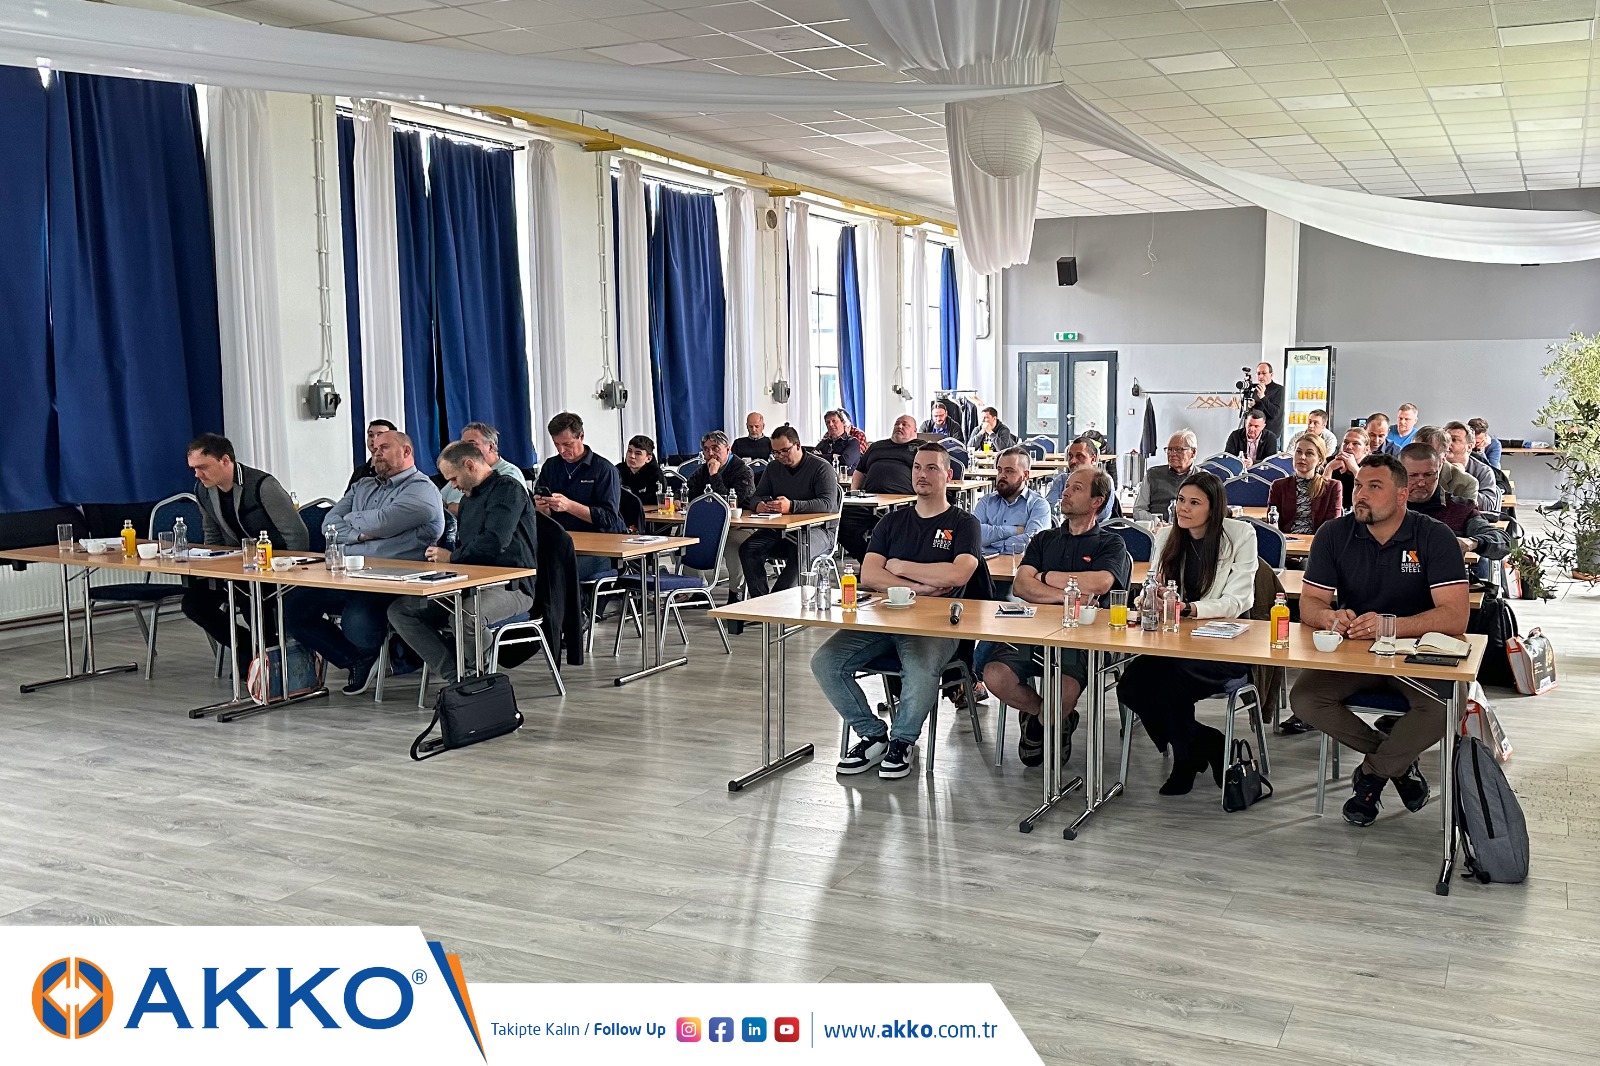 AKKO held a training event in the Czech Republic with its solution partners. 